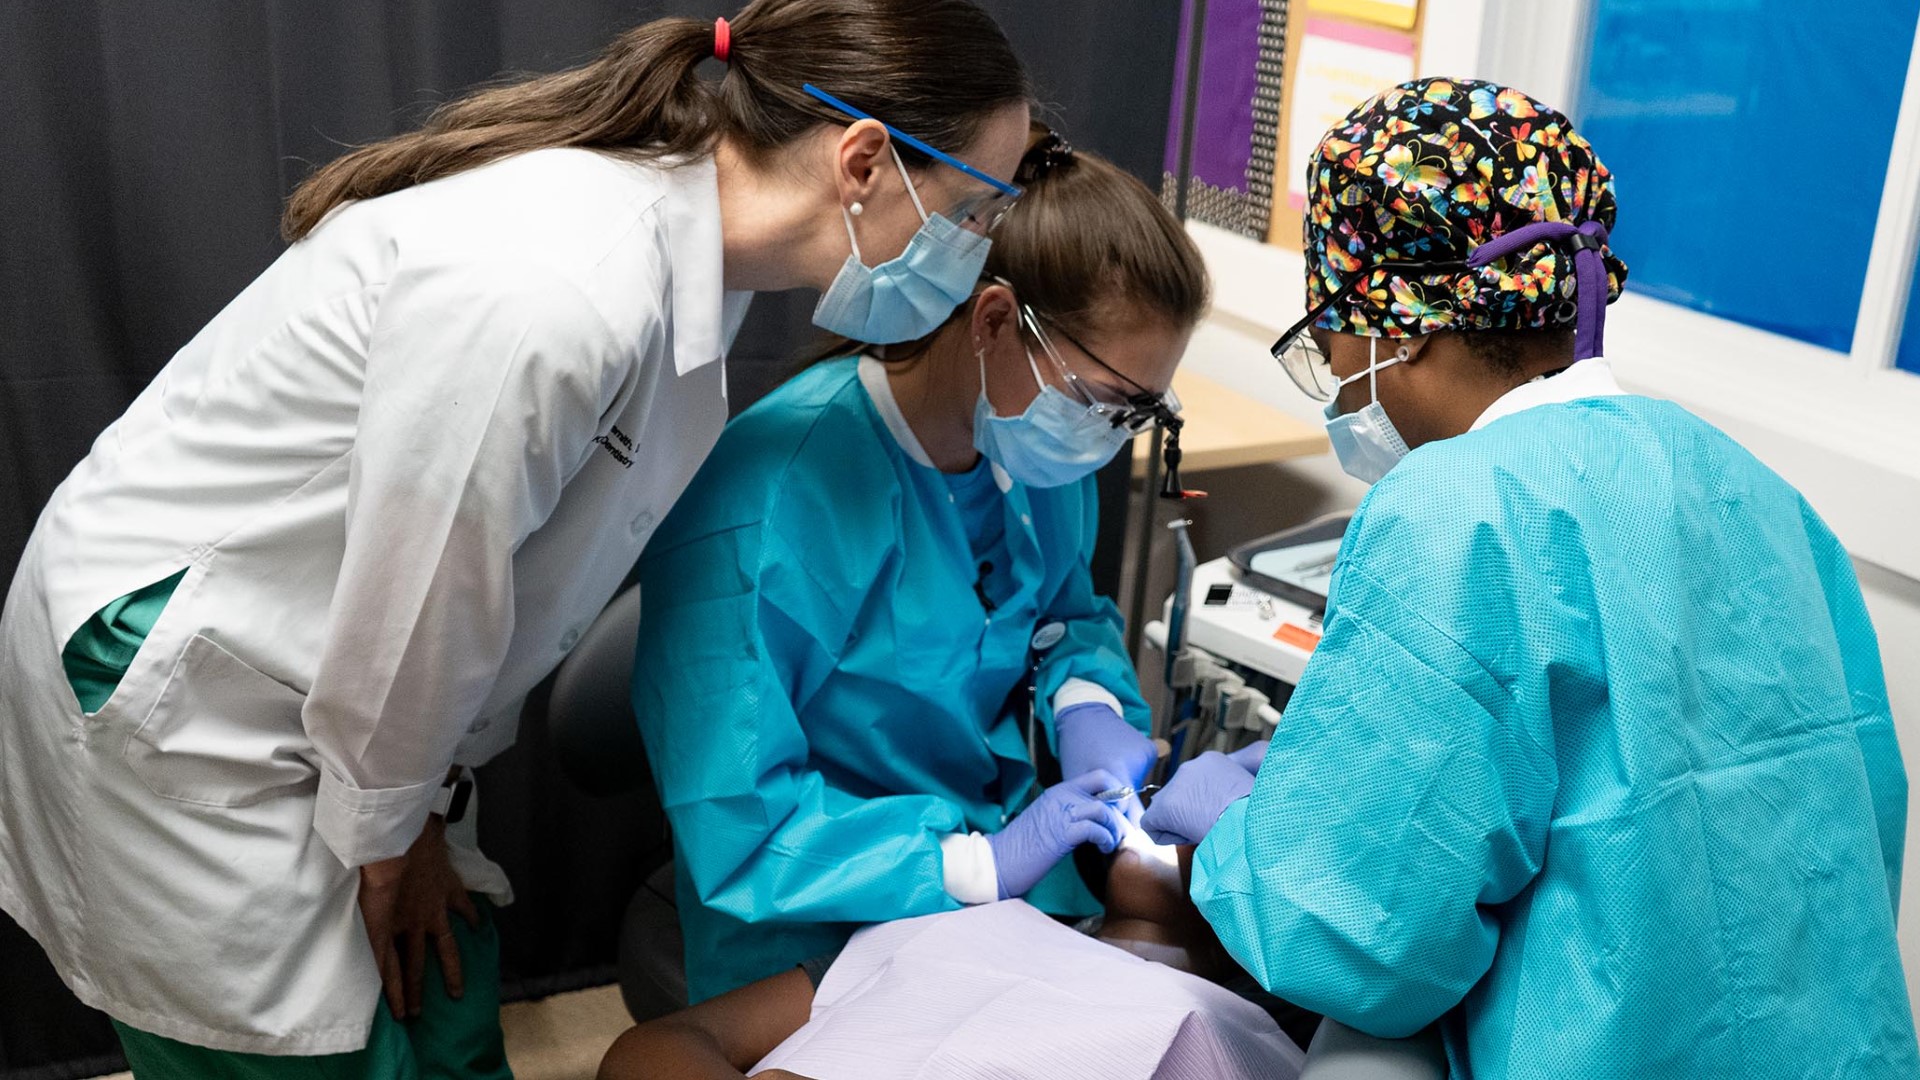 Here's a look inside a program where more than half of the patients lacked consistent medical care—until they were introduced to school-based health care.